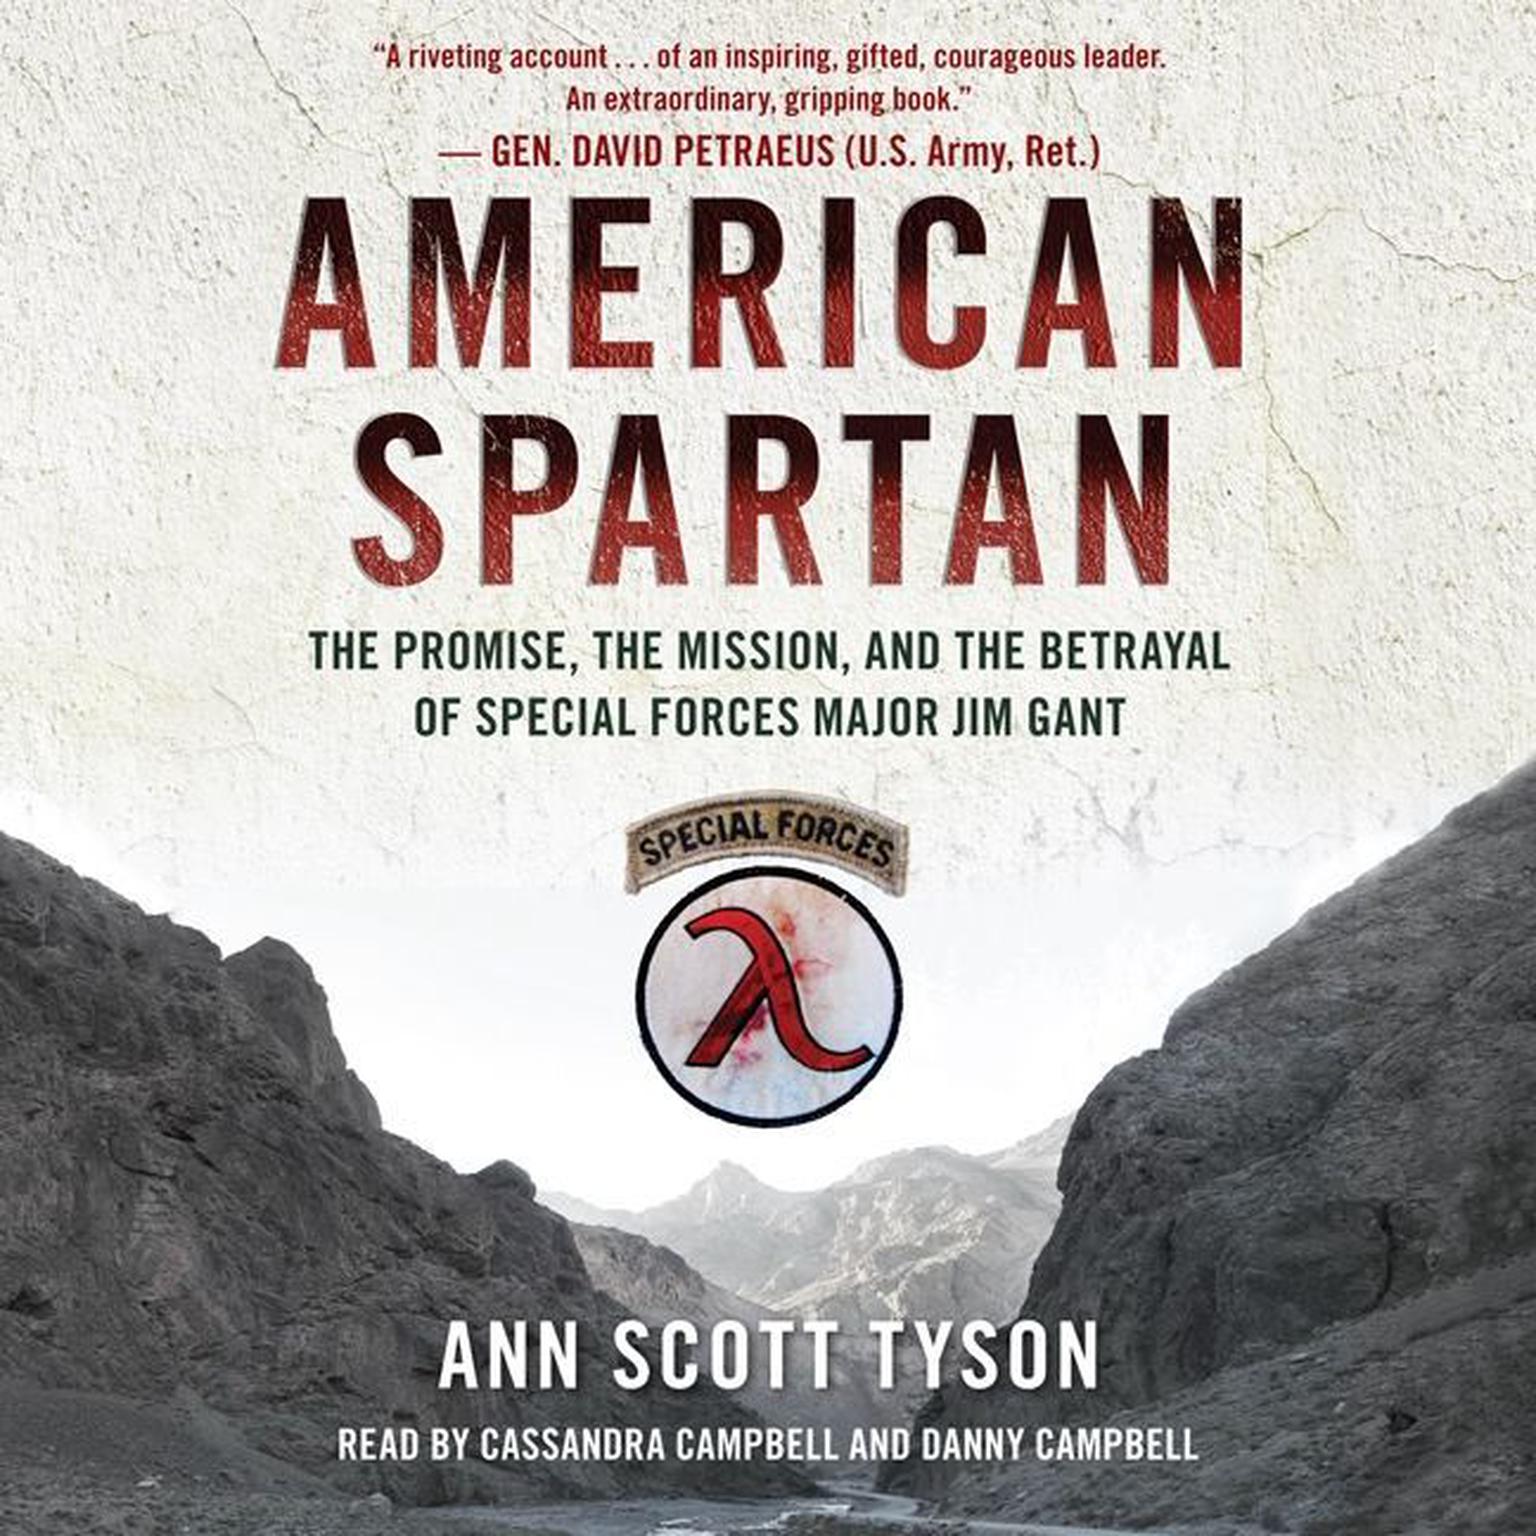 American Spartan: The Promise, the Mission, and the Betrayal of Special Forces Major Jim Gant Audiobook, by Ann Scott Tyson